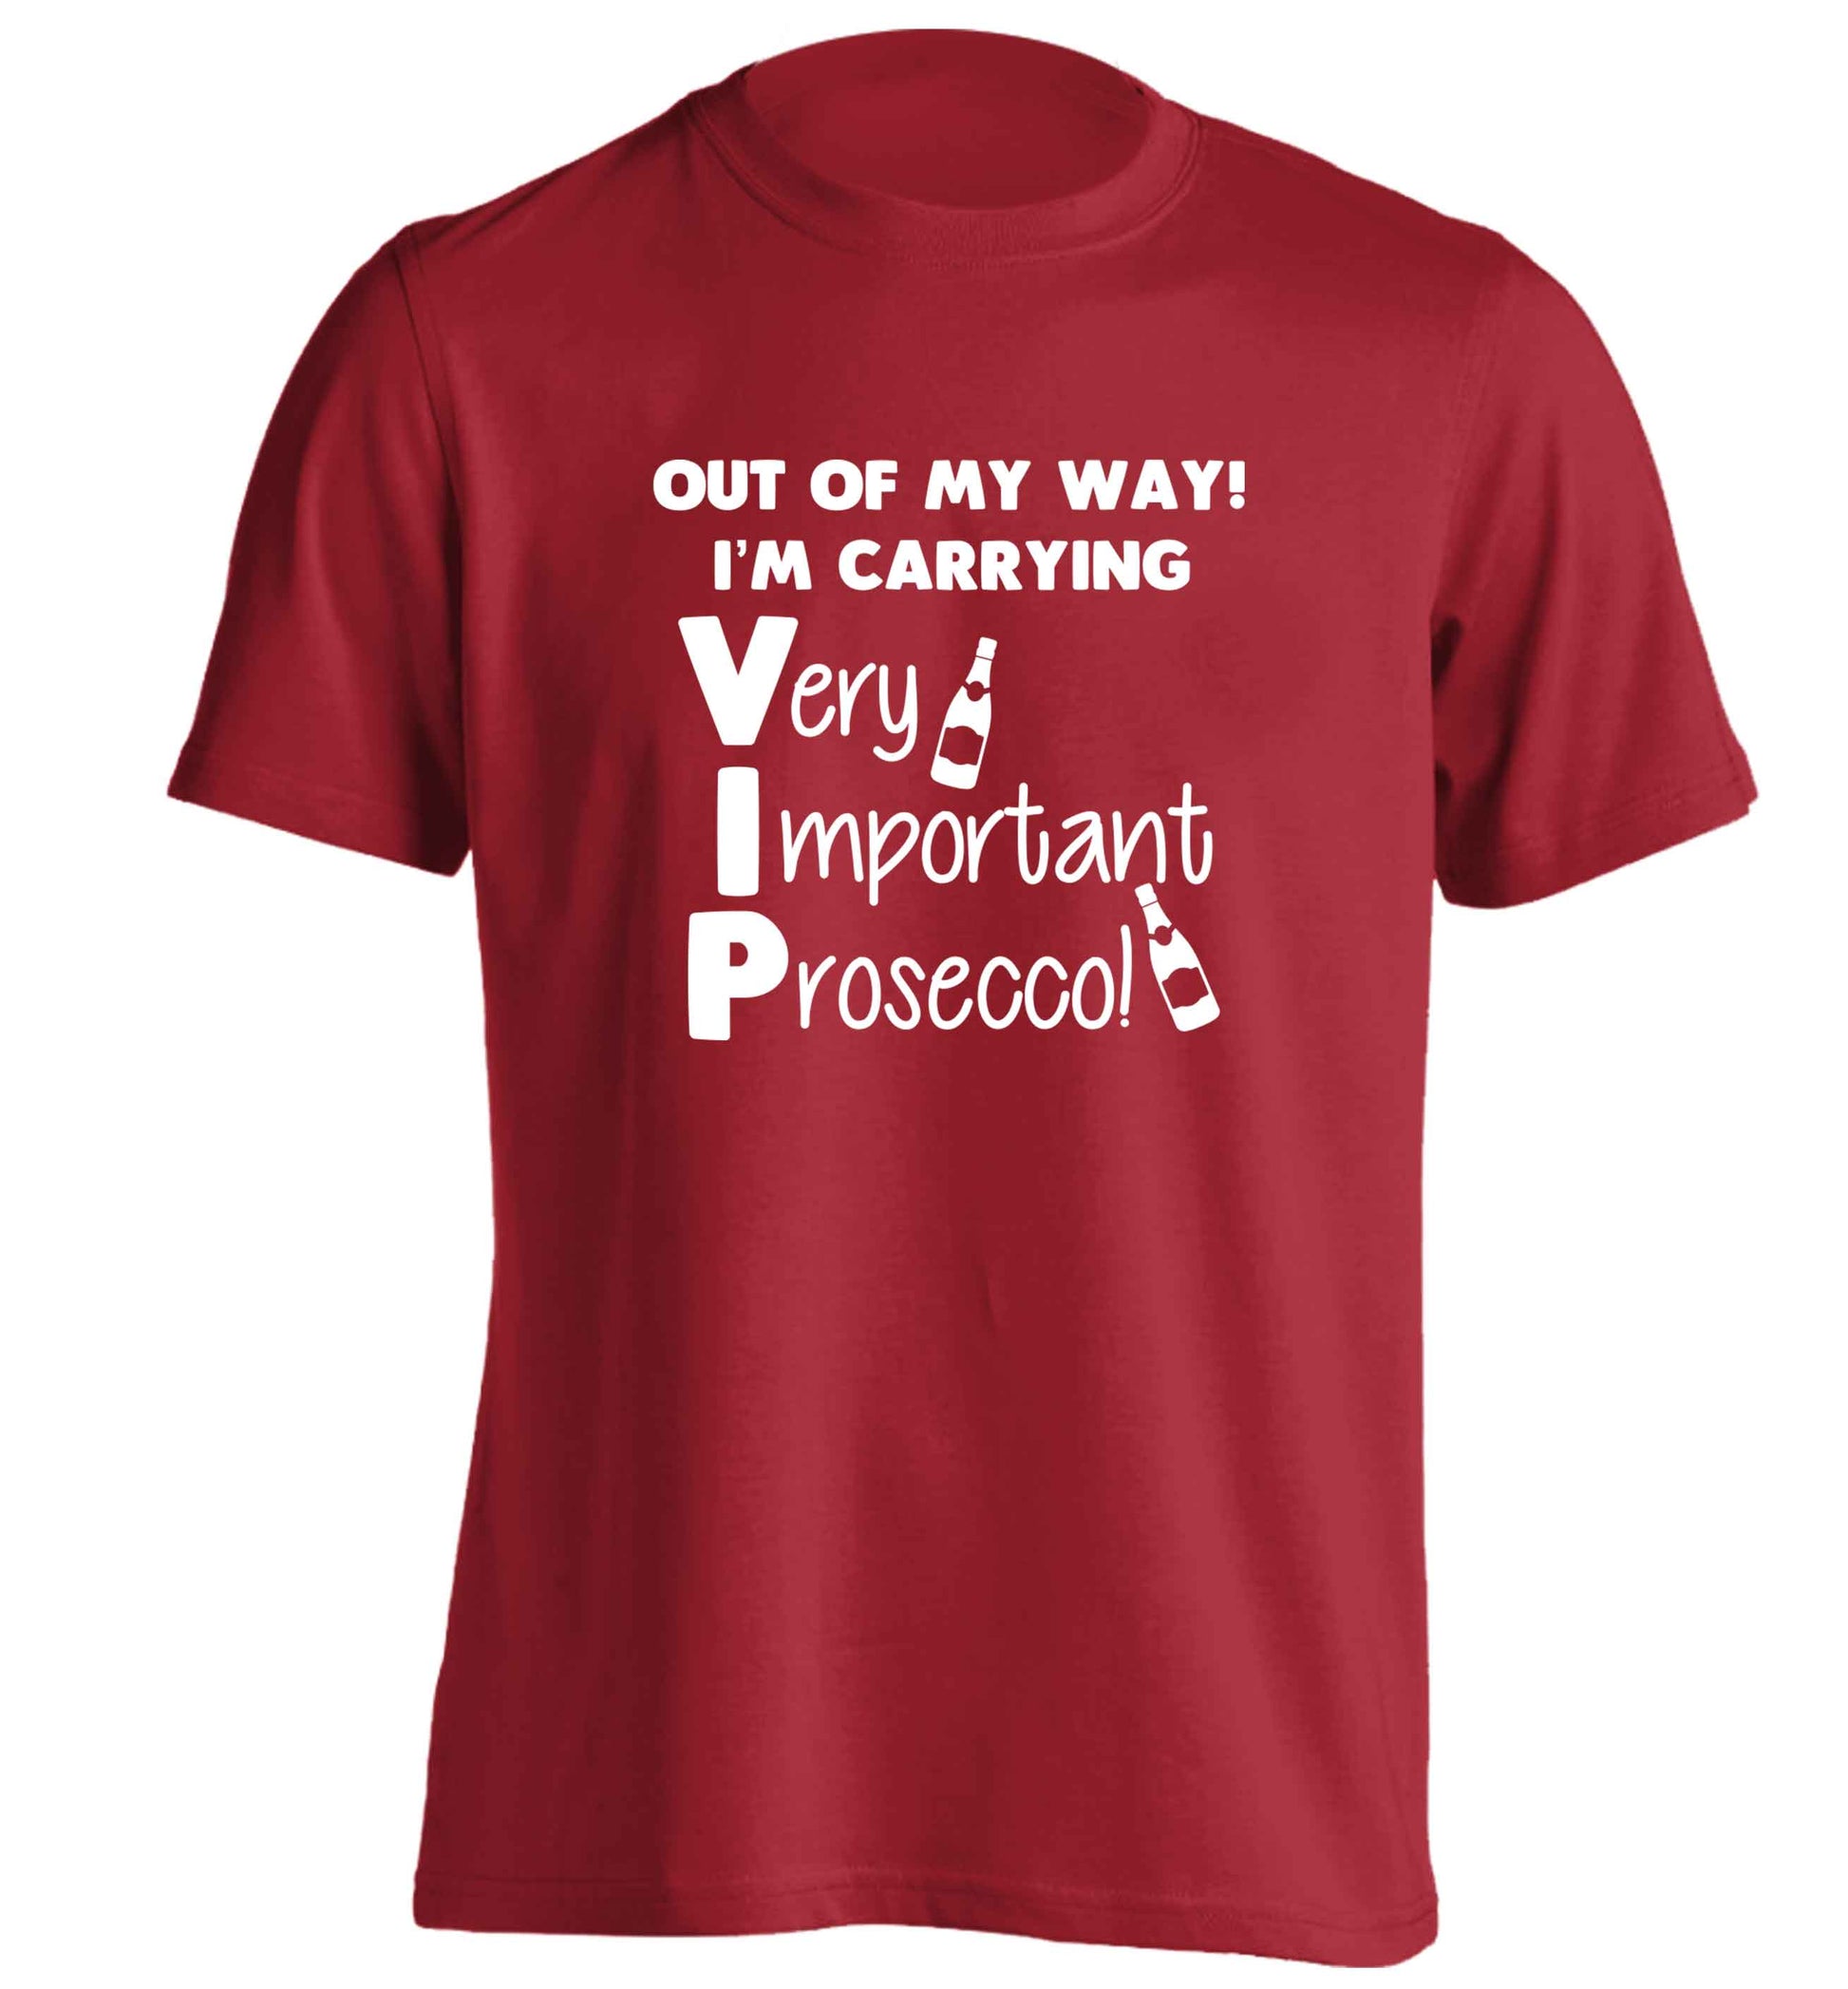 Out of my way I'm carrying very important prosecco! adults unisex red Tshirt 2XL